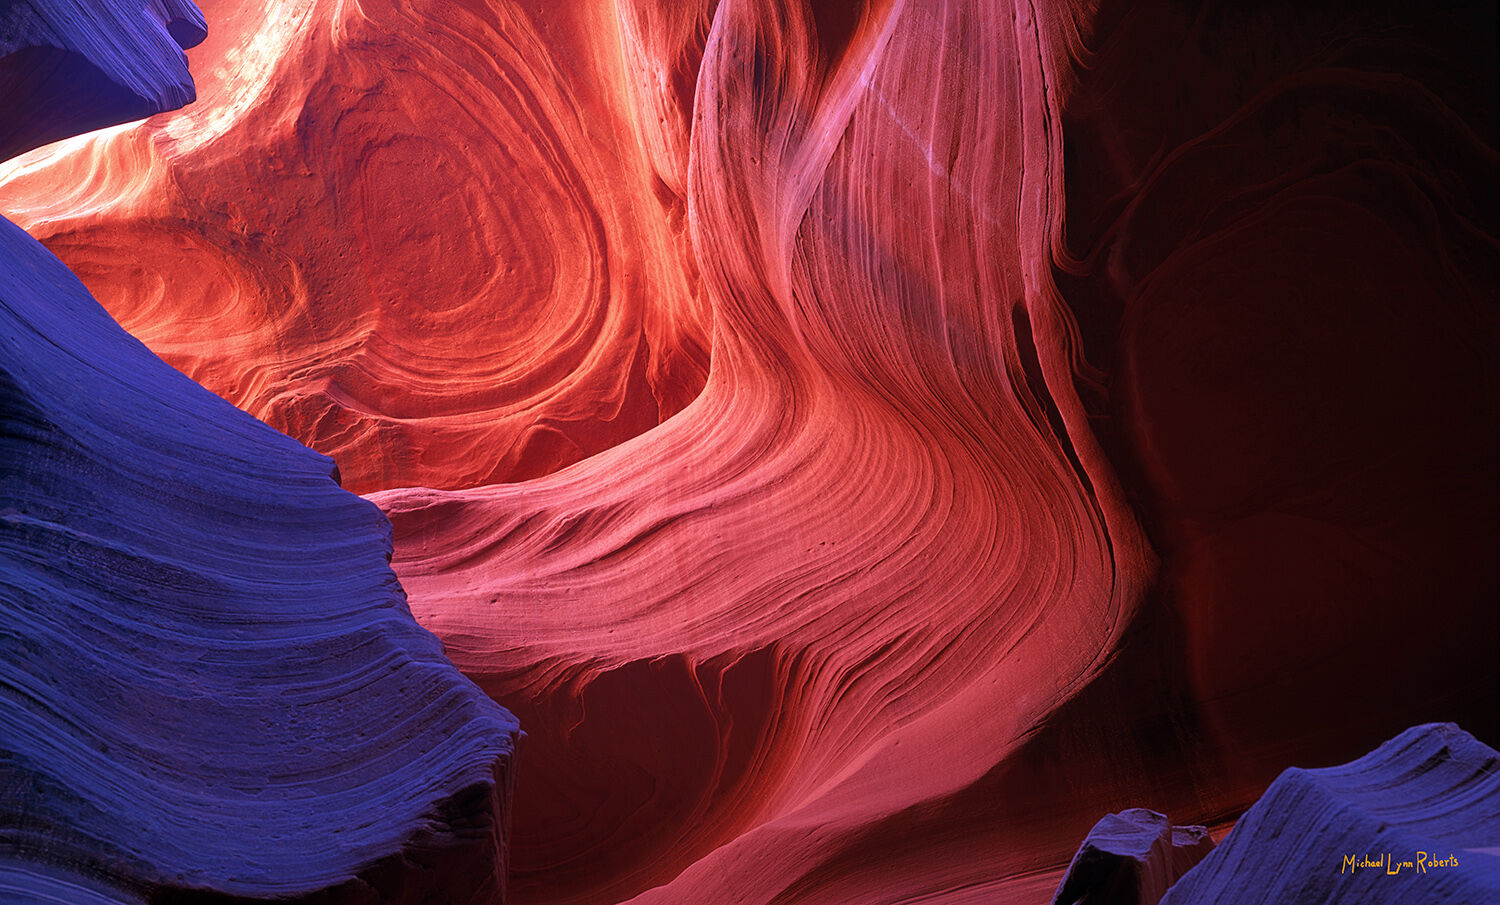 This is the first photograph I made on my first visit to Lower Antelope Canyon in 2006, and it remains one of my all-time favorites...